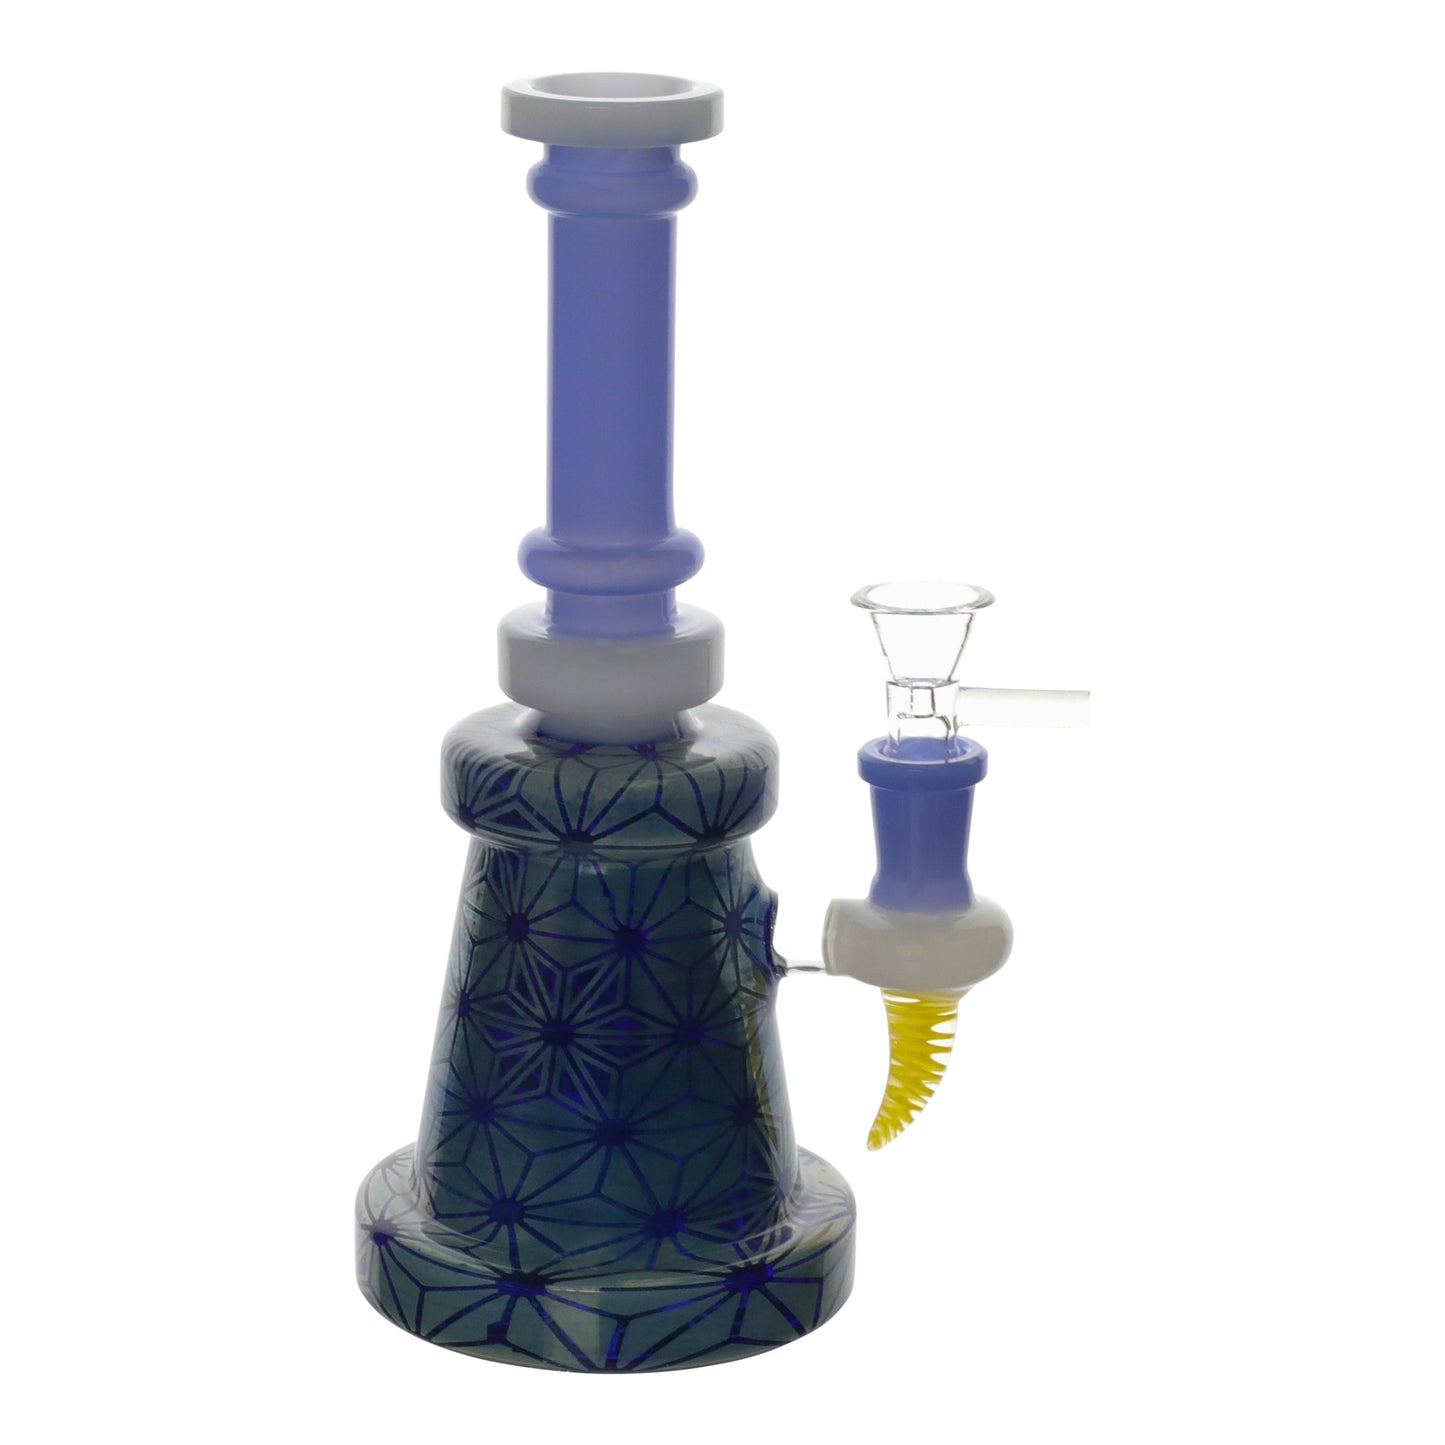 The Hieroglyphic Bong - 11in Prism